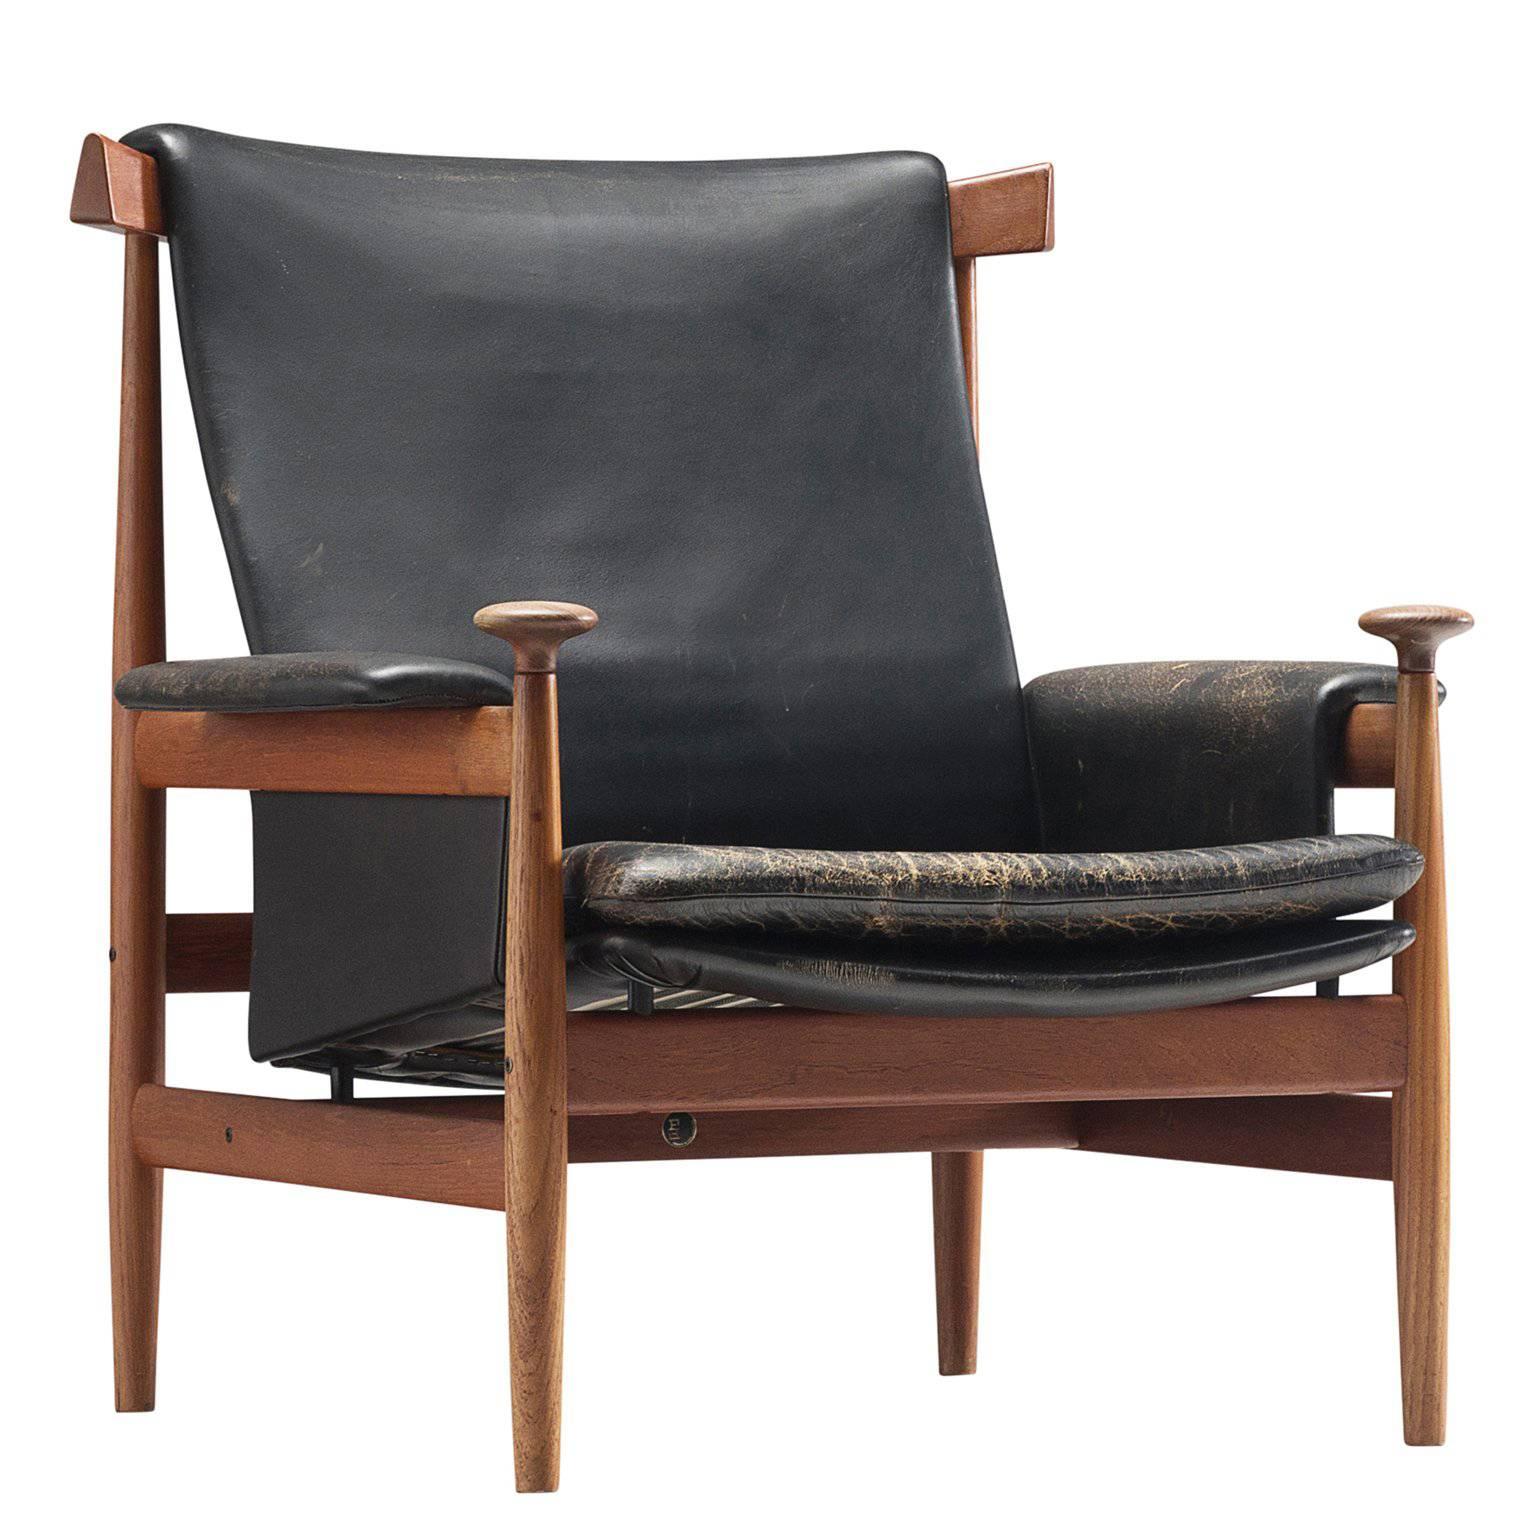 Early Finn Juhl "Bwana" Chair with Original Leather